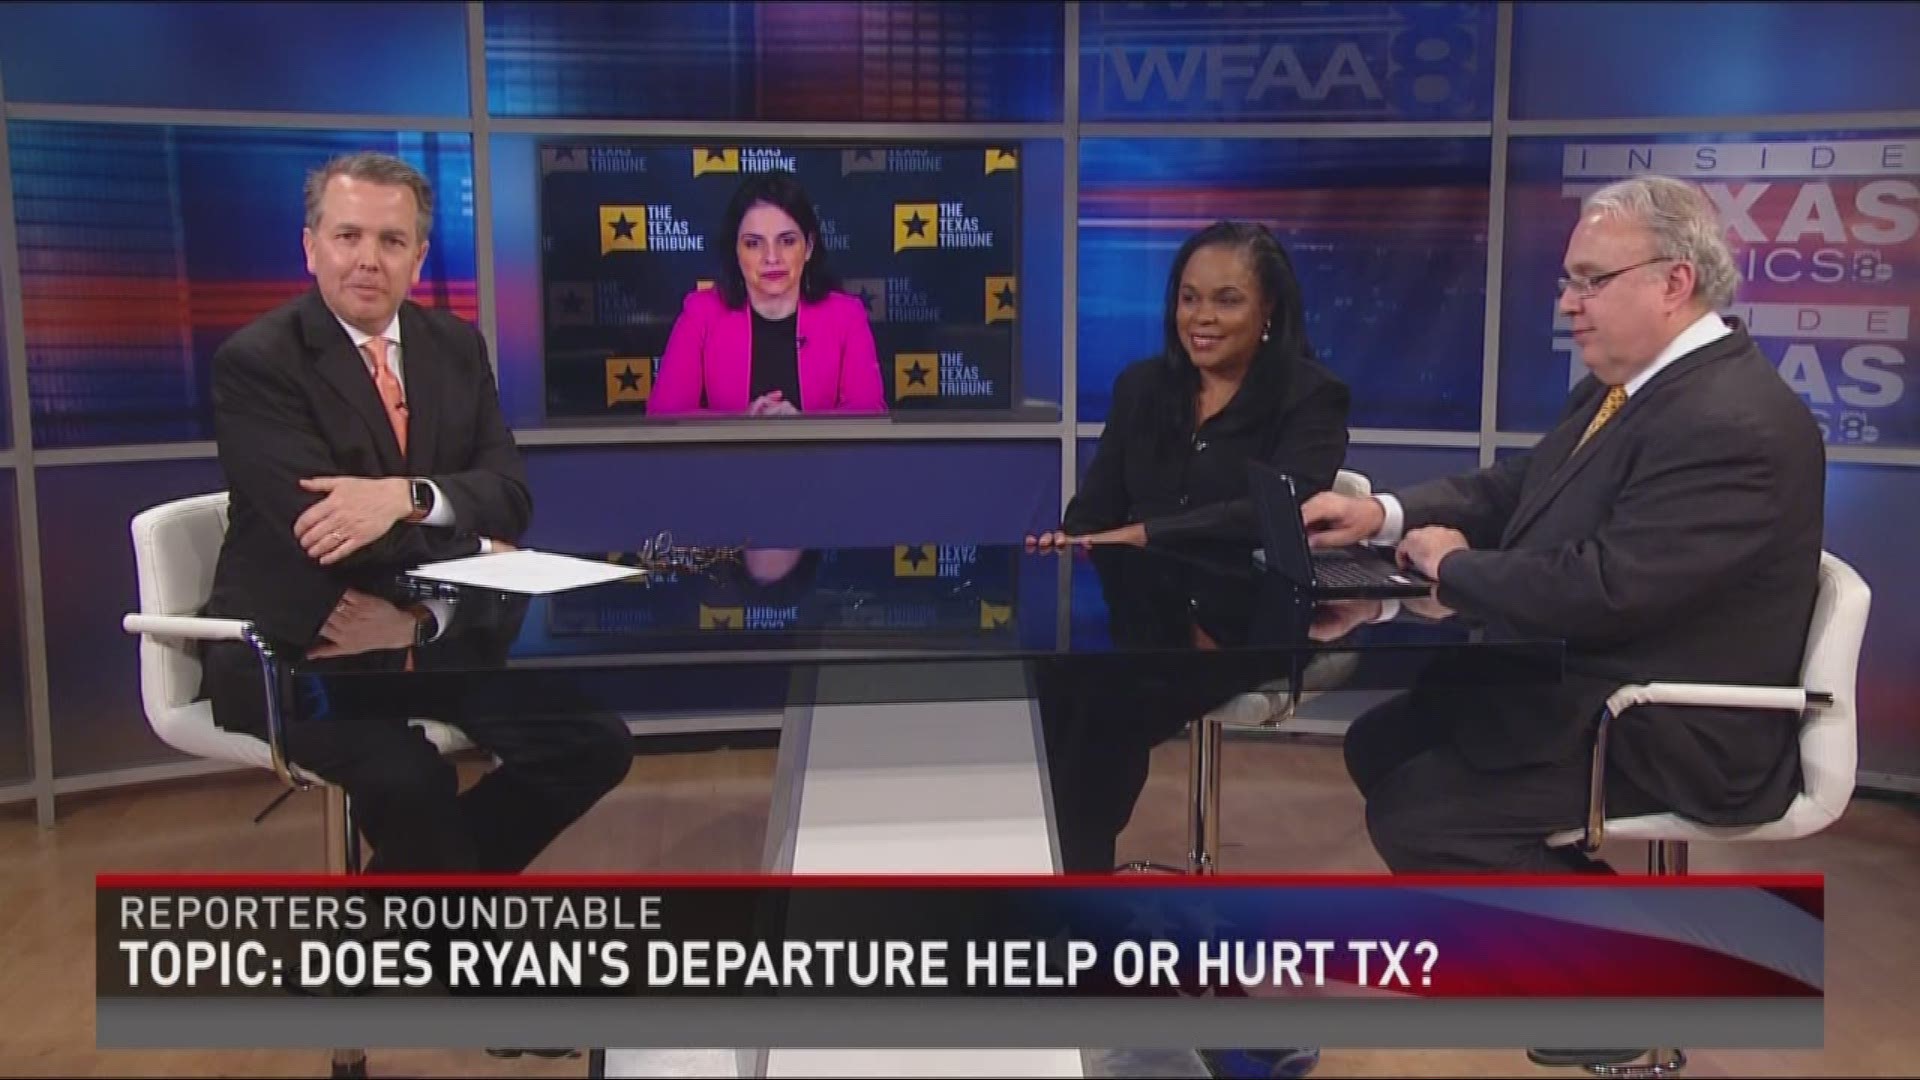 eporters Roundtable puts the headlines in perspective each week. Bud and Alana returned along with Berna Dean Steptoe, WFAA's political producer.  They discussed the speaker races in both the U.S. House and the Texas House, whether Texas still needs to s